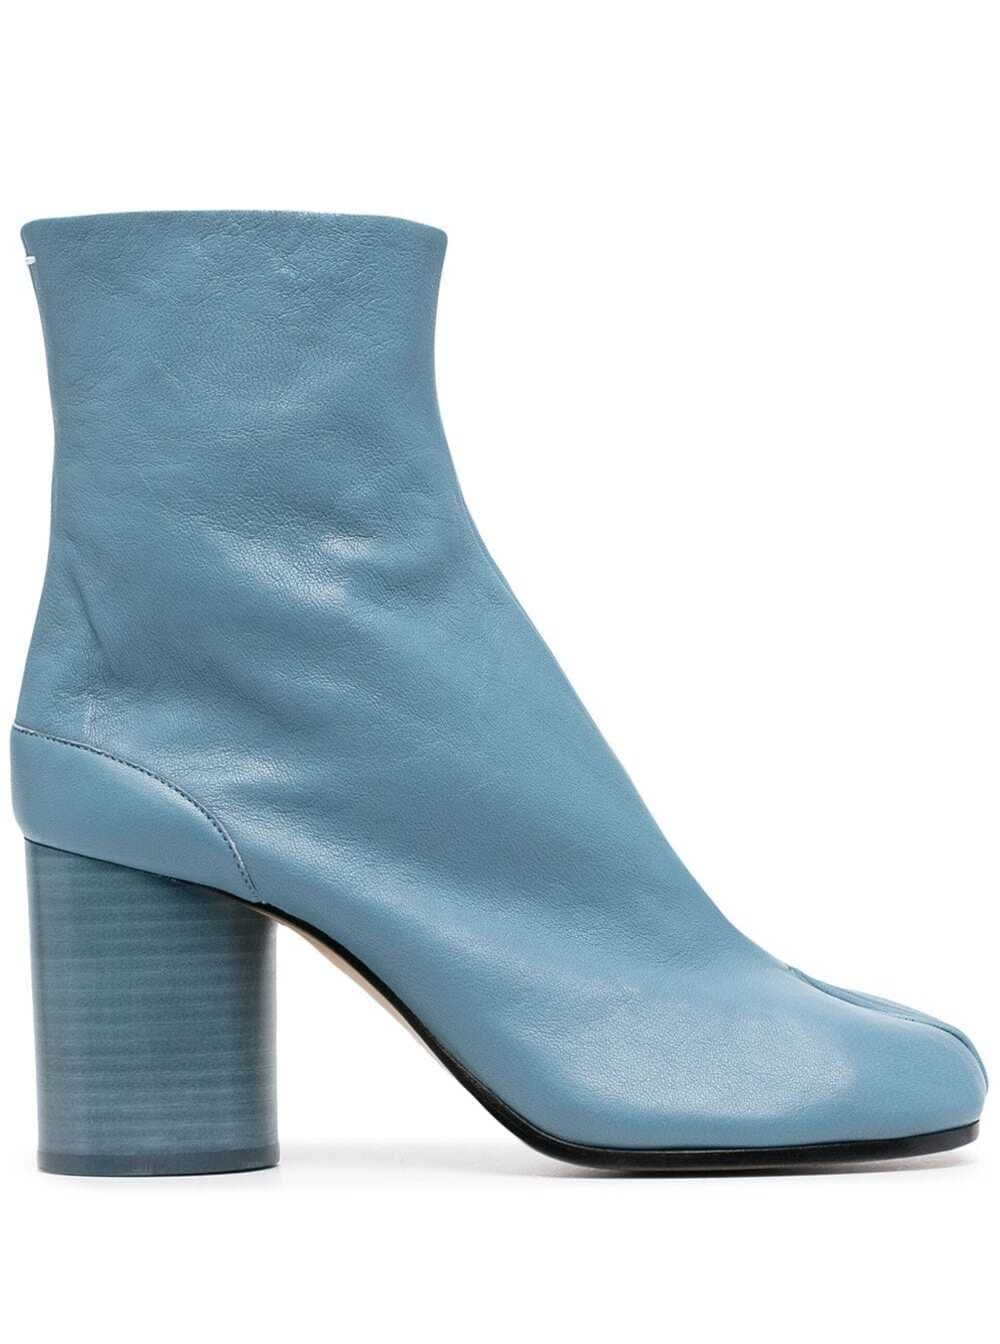 Maison Margiela Tabi Ankle Boots In Light Blue Leather